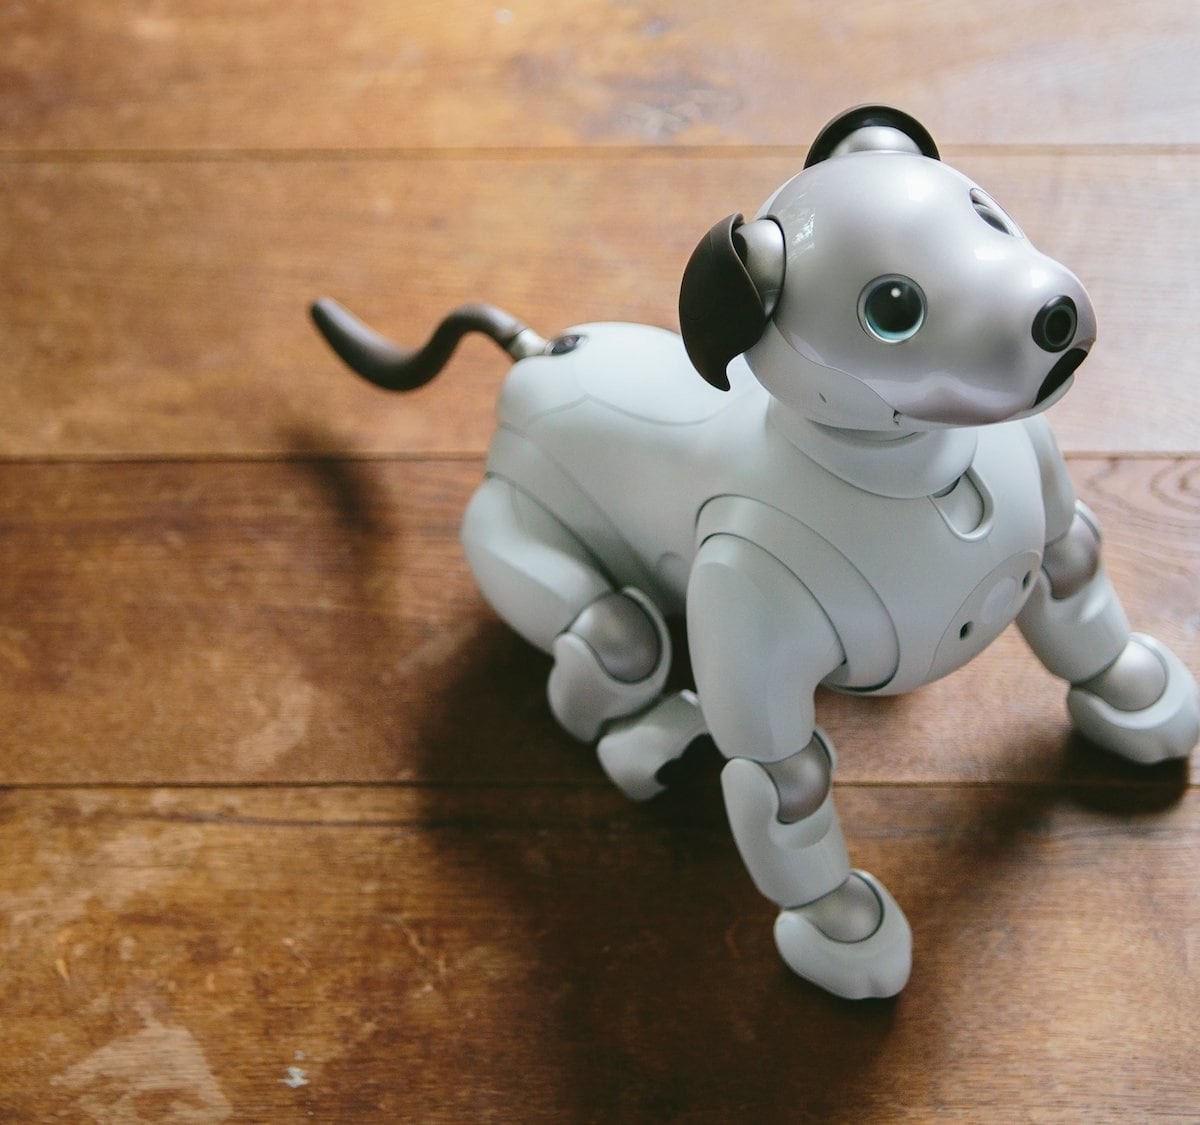 This Sony aibo Is a Cute Intelligent Dog Robot Pet